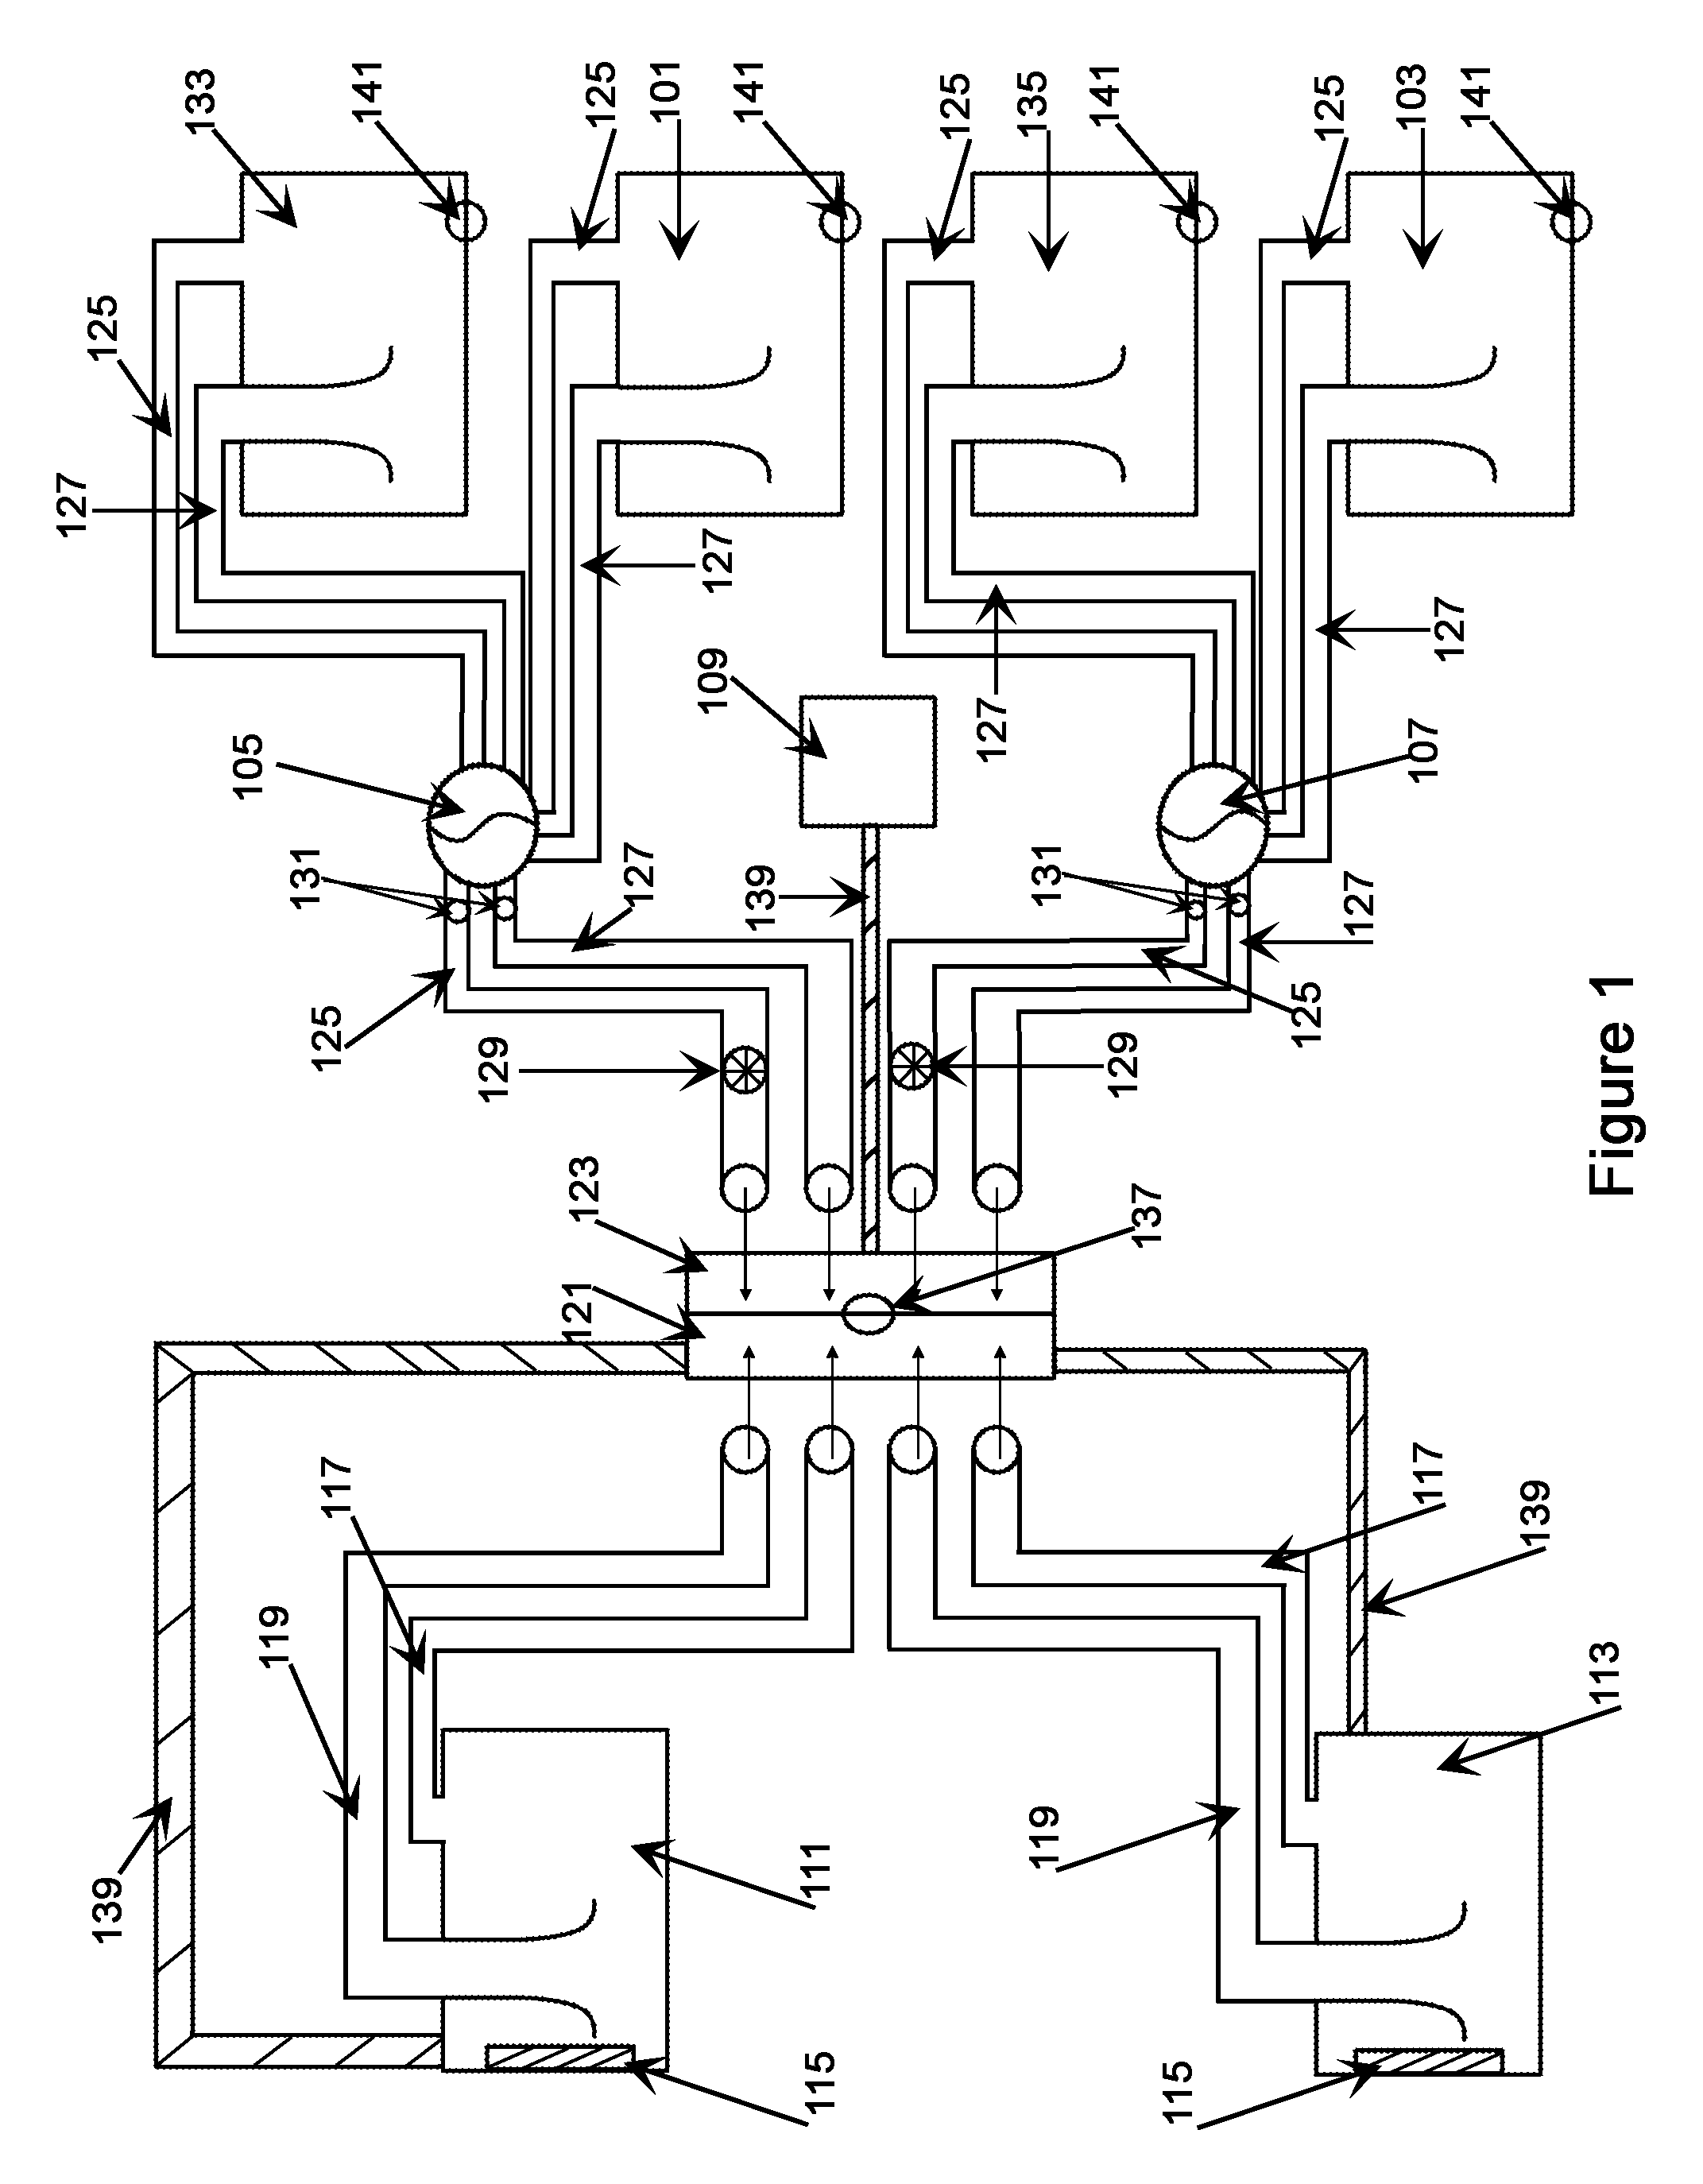 System and apparatus for rapid recharging of electric batteries